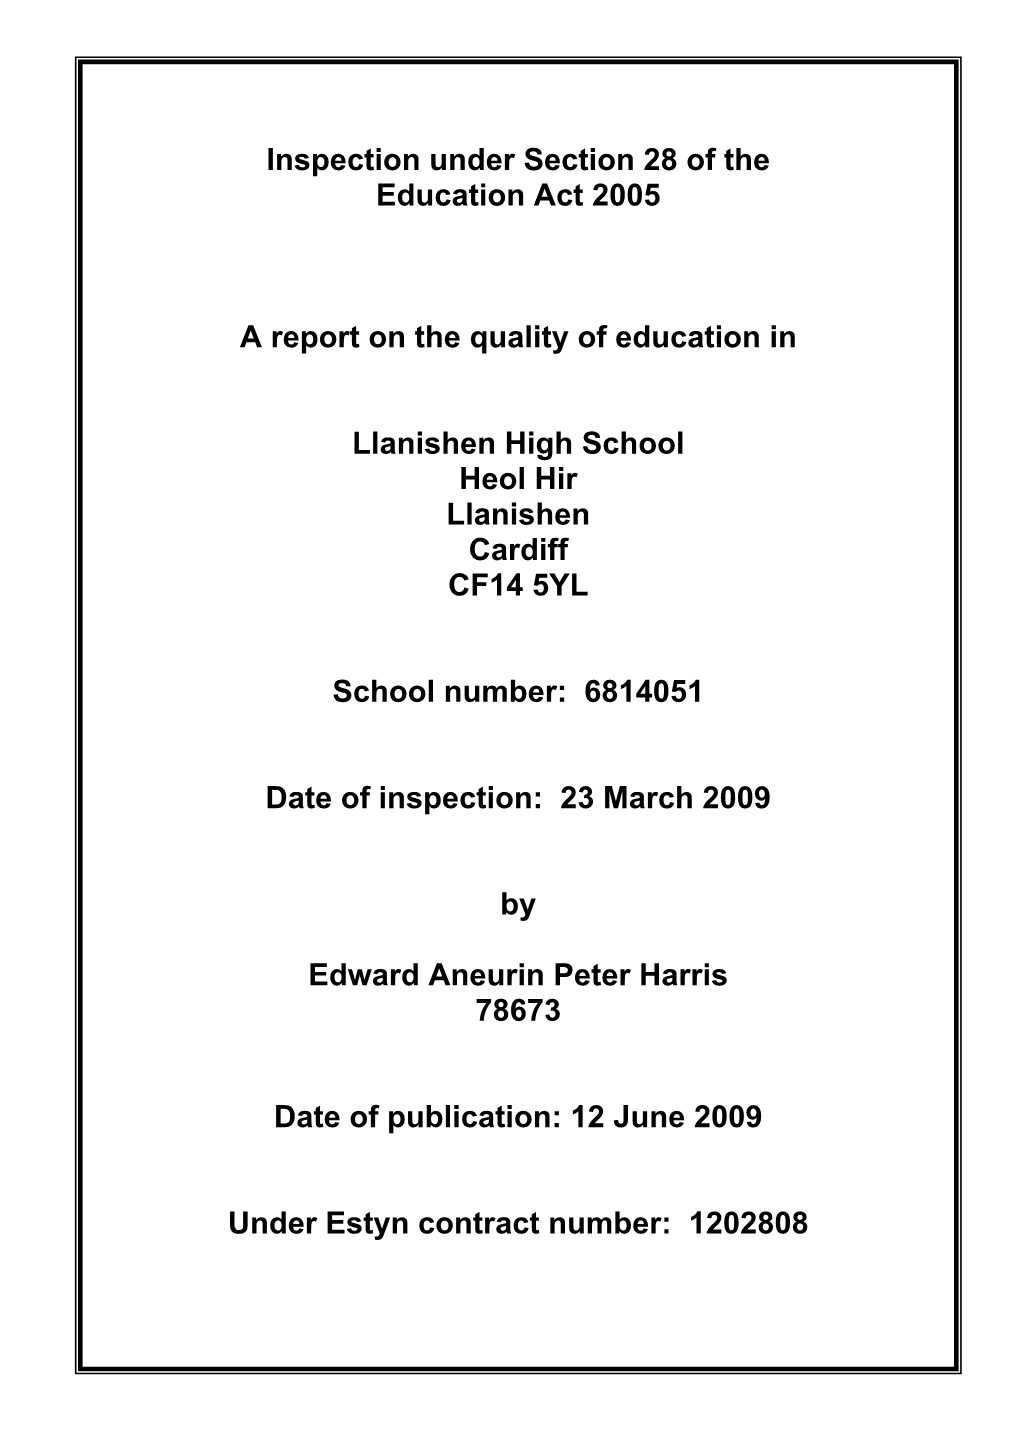 Inspection Under Section 28 of the Education Act 2005